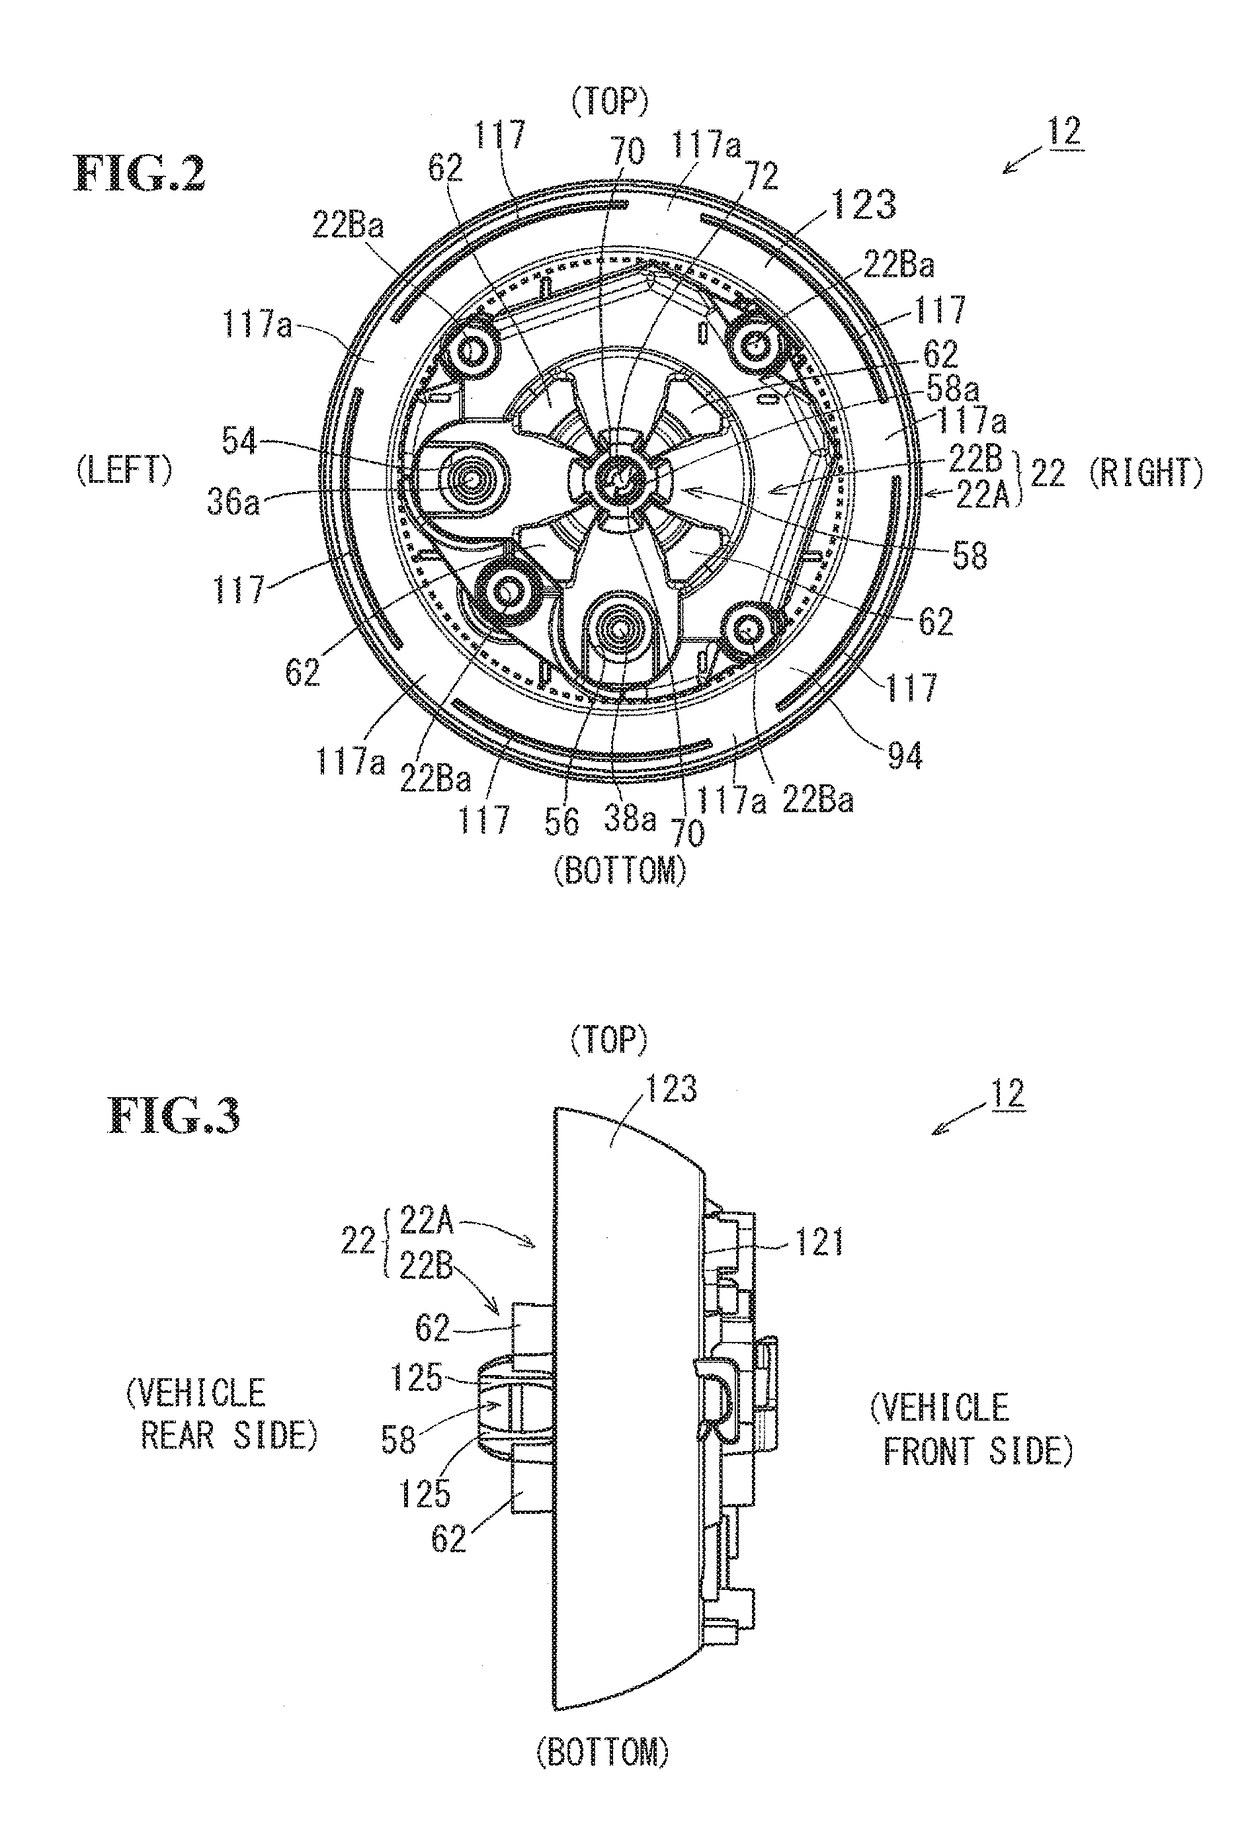 View angle adjustment mechanism in view device